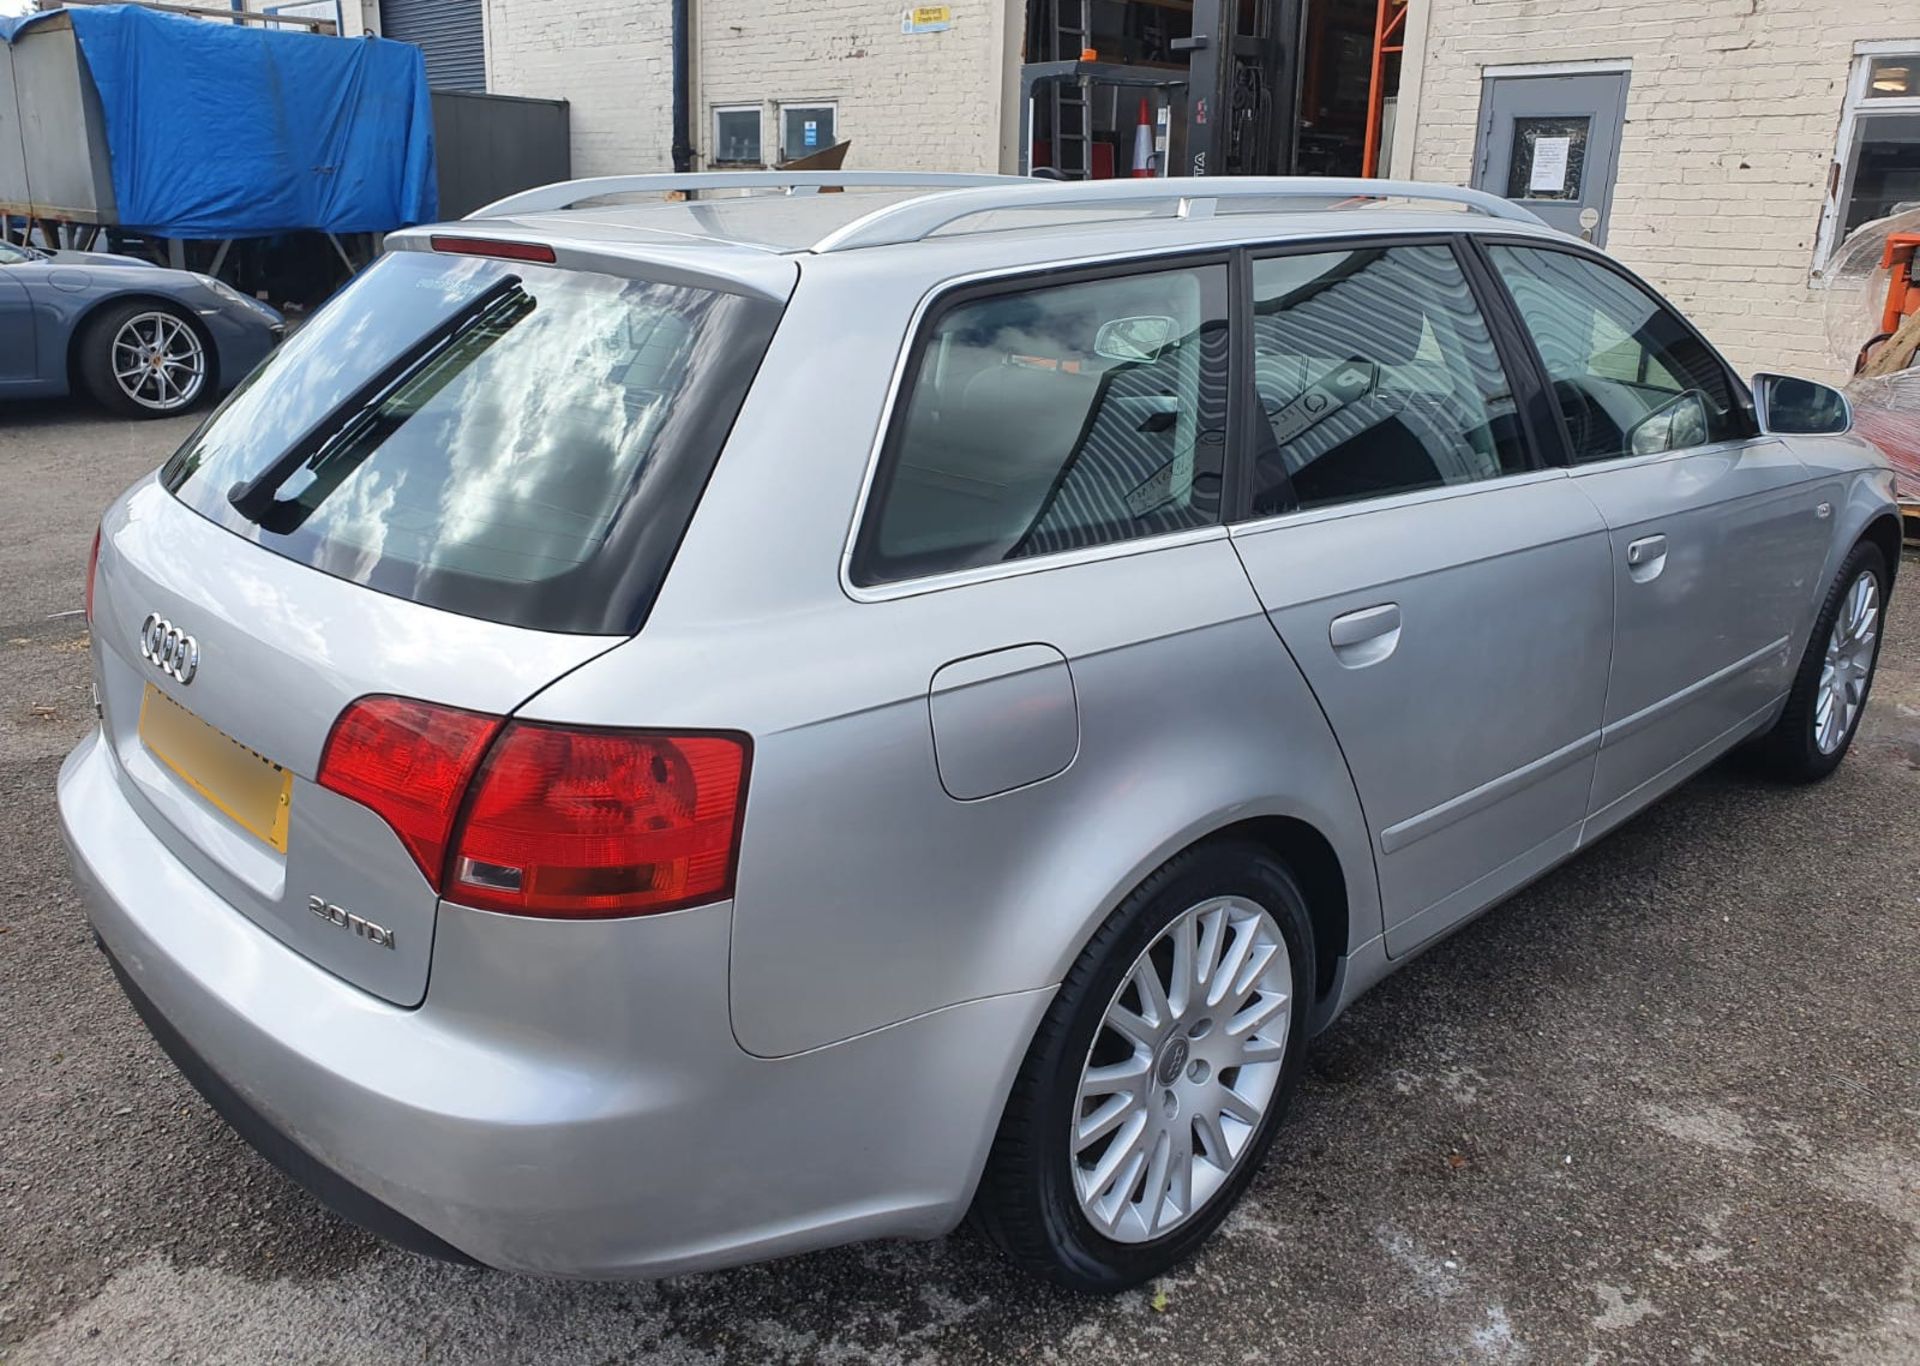 2007 Audi A4 2.0 TDI 5dr Estate in Silver - CLTBC - NO VAT ON THE HAMMER -  - Location: Altrincham - Image 30 of 49